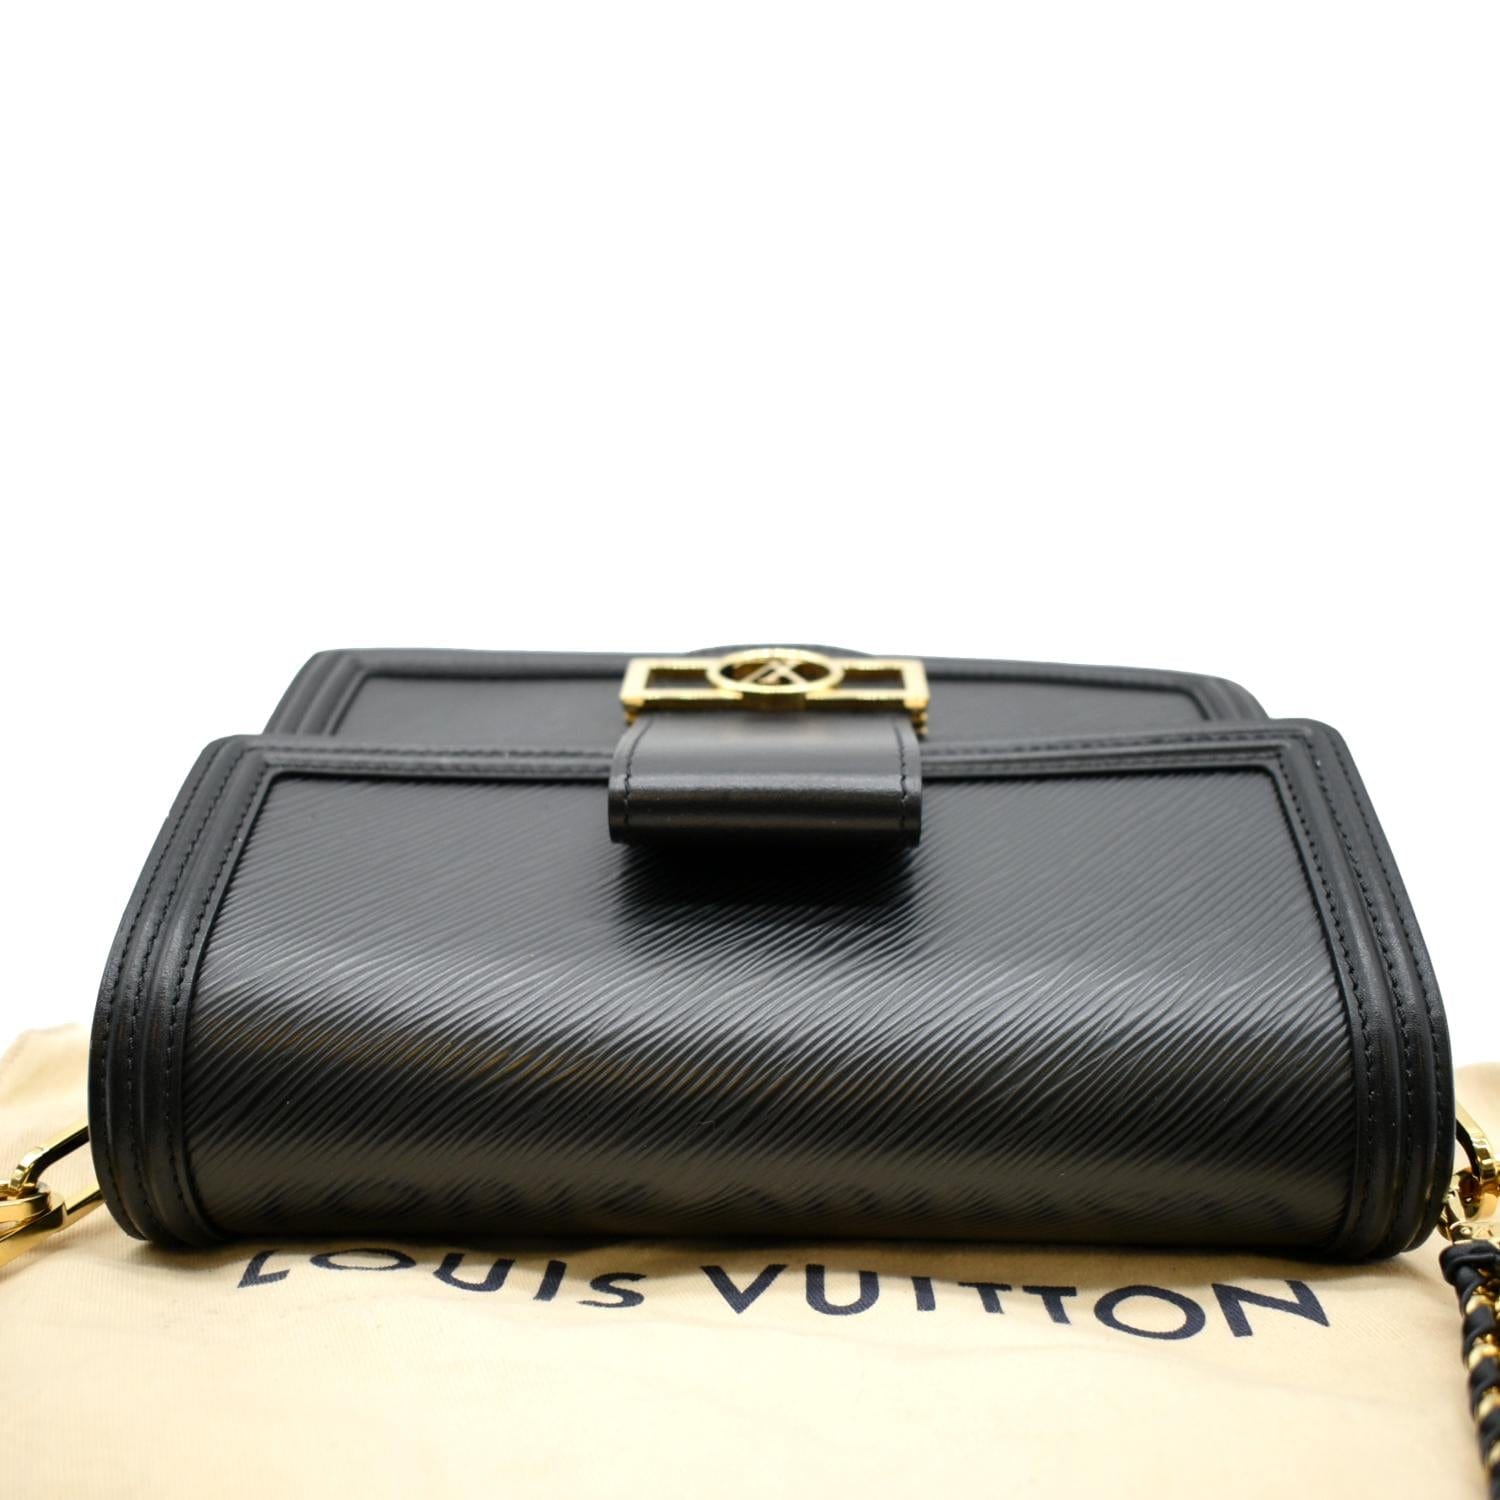 Louis Vuitton - Authenticated Dauphine Handbag - Leather Black for Women, Very Good Condition